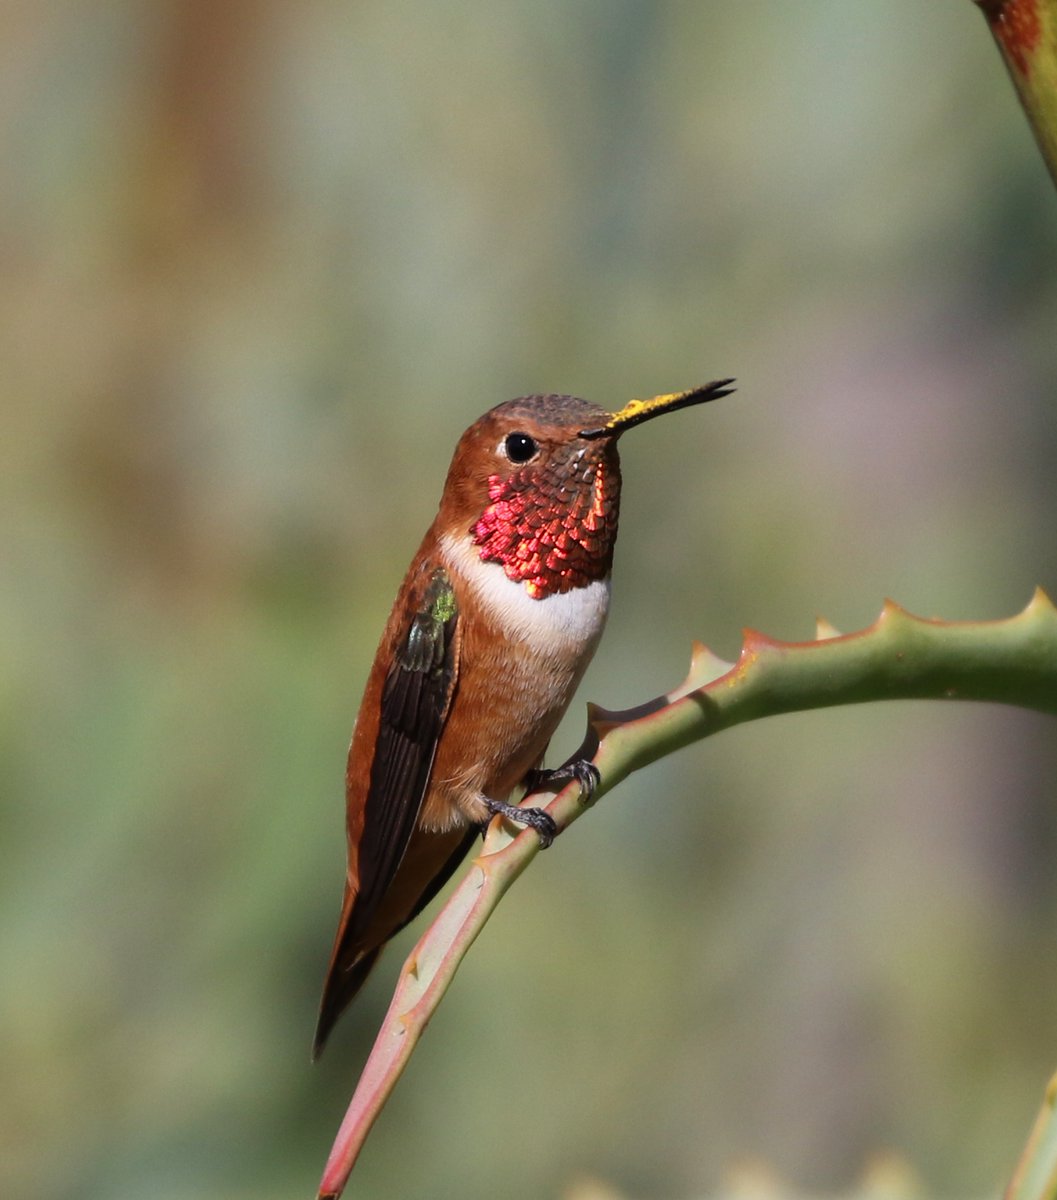 A haiku about the pushiest visitor to the hummingbird feeder:

Shiny feisty boss,
“Back off, that nectar's all mine!”
Tiny but mighty.

Photo: Tom Benson, CC BY-NC-ND flic.kr/p/24Reotd